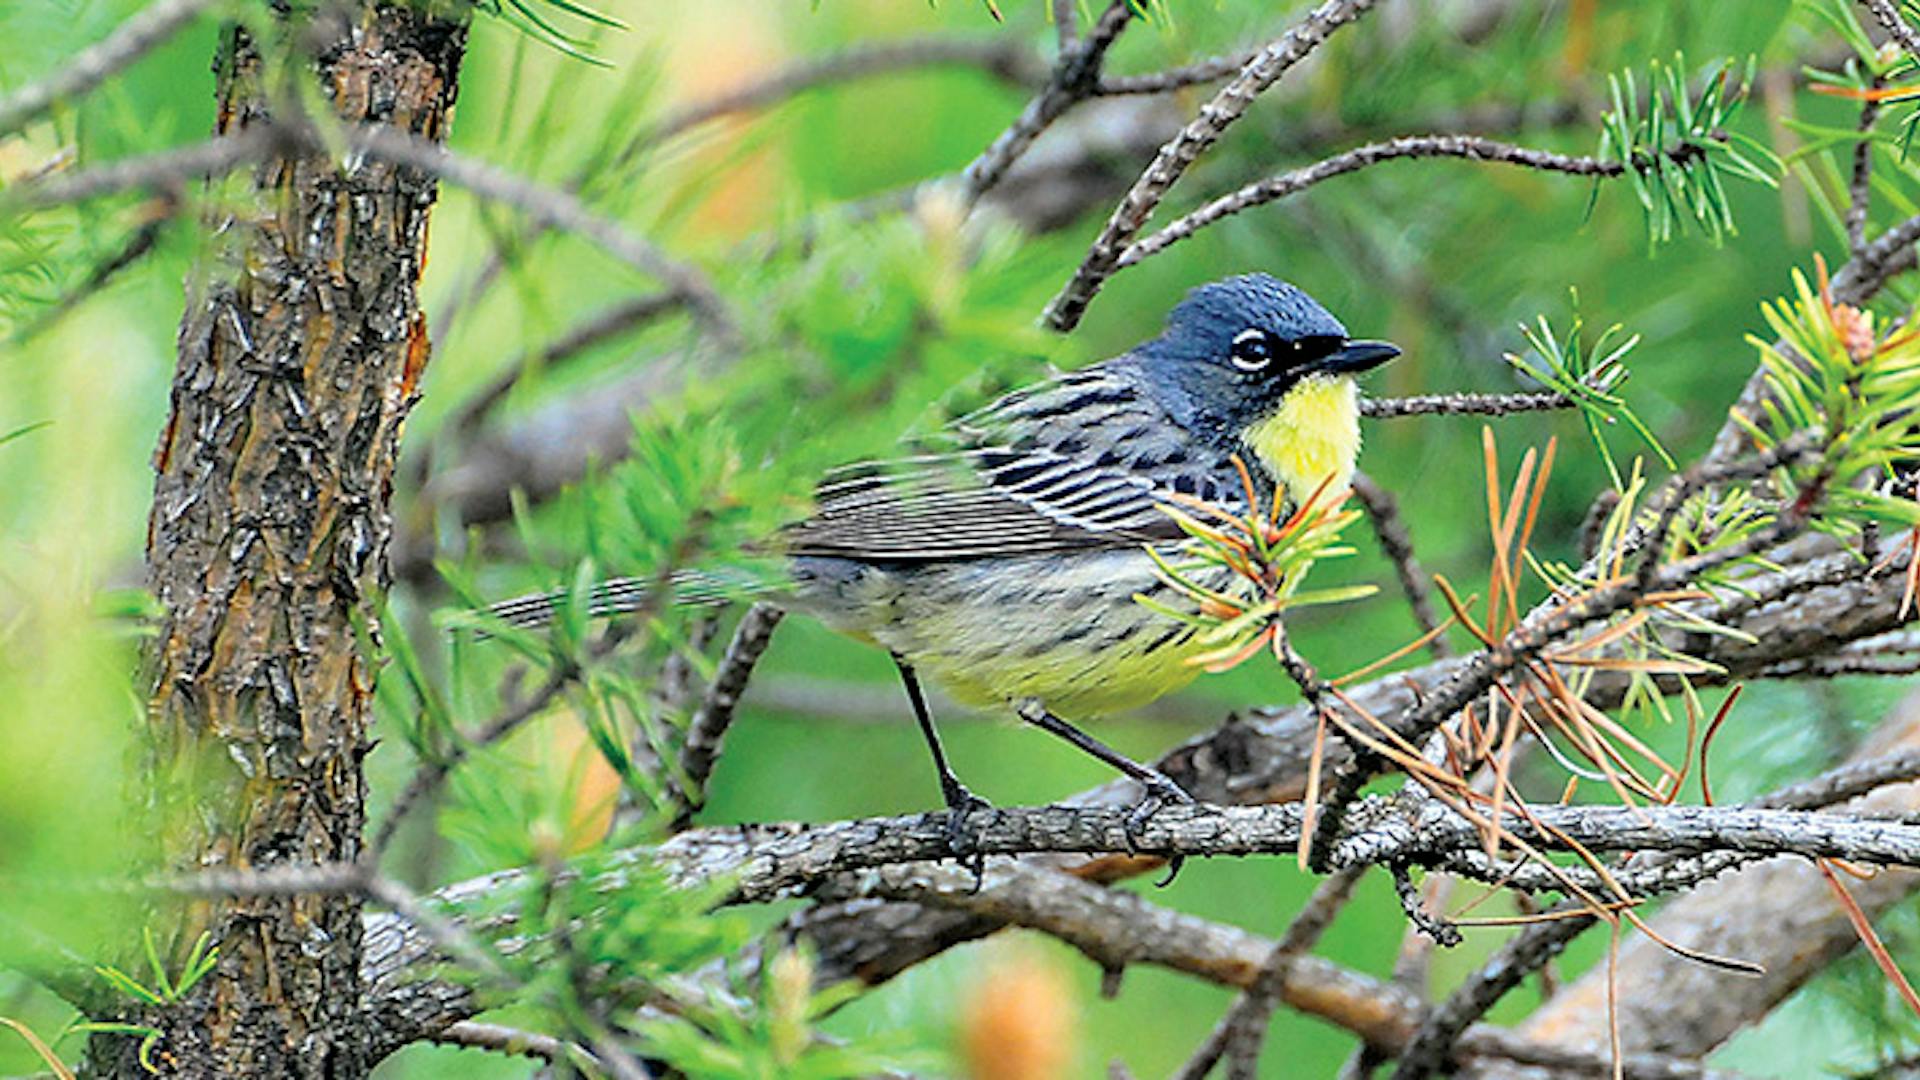 Kirtland's Warbler in a tree in Grayling, Michigan (photo courtesy of Kirtland's Warbler Tours)